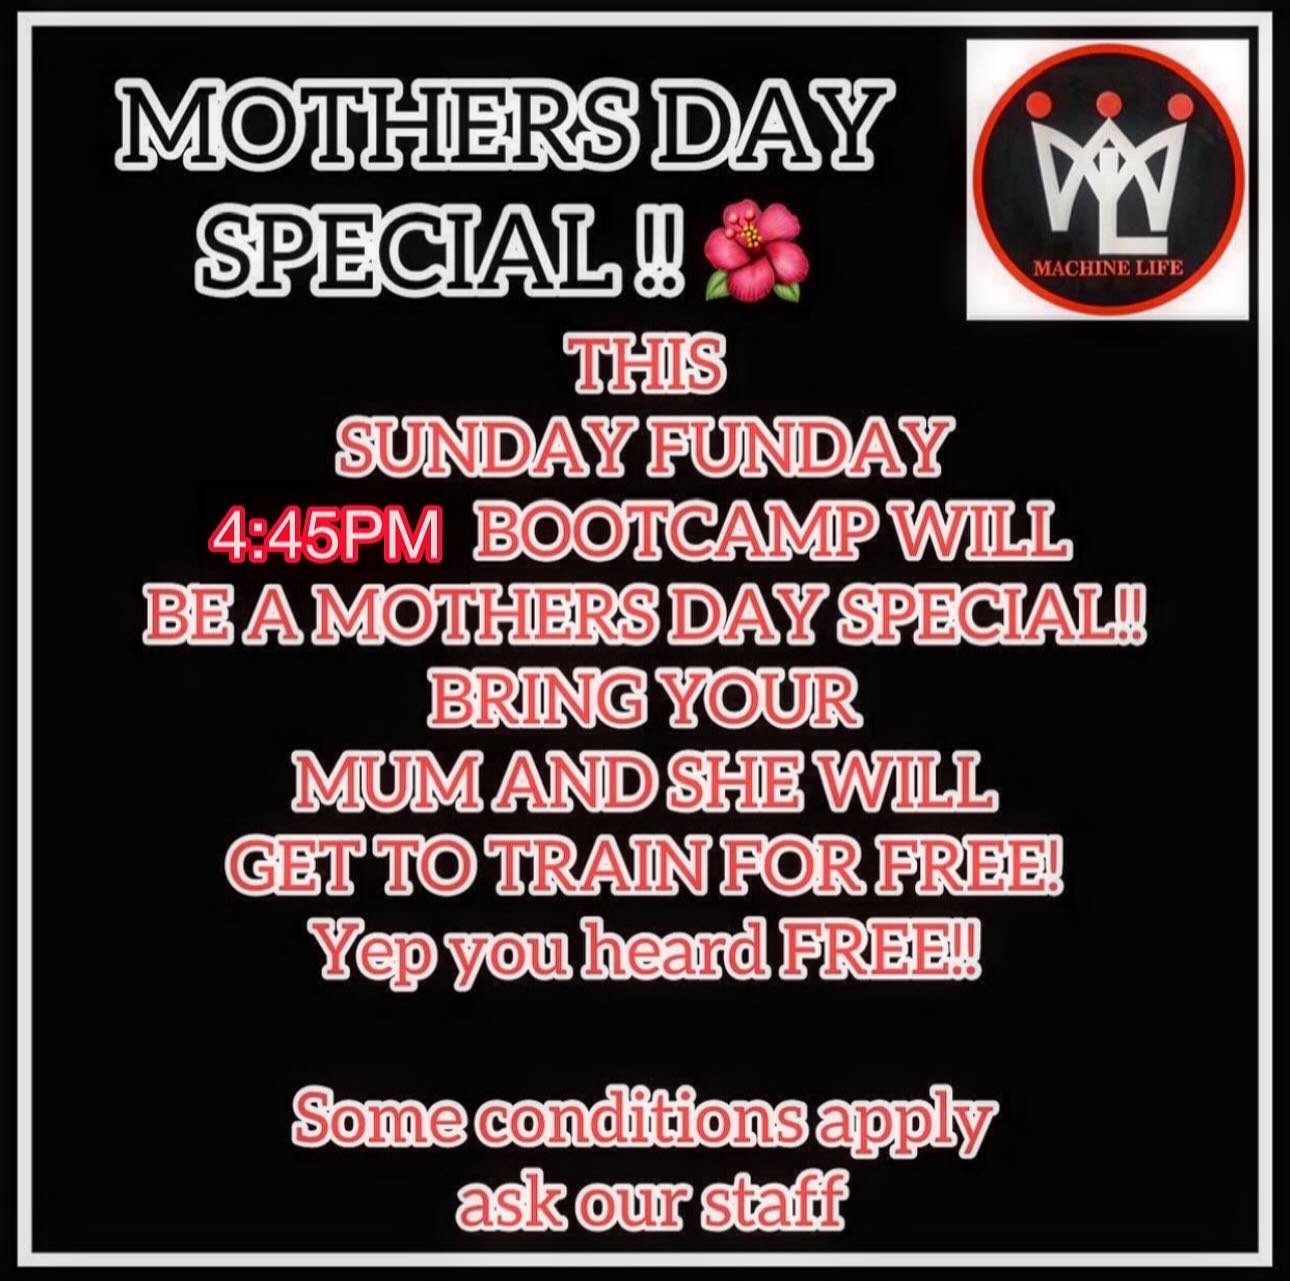 MOTHERS DAY SPECIAL!!
BRING YO MUMMAZ FOR FREE ON SUNDAY!! ❤️ 🙌🏽💯

Non members and members if your mum isn&rsquo;t a member with us already. Then you can bring your mums and she will train for free!!

For mother&rsquo;s day only!!🌺
If you are a n